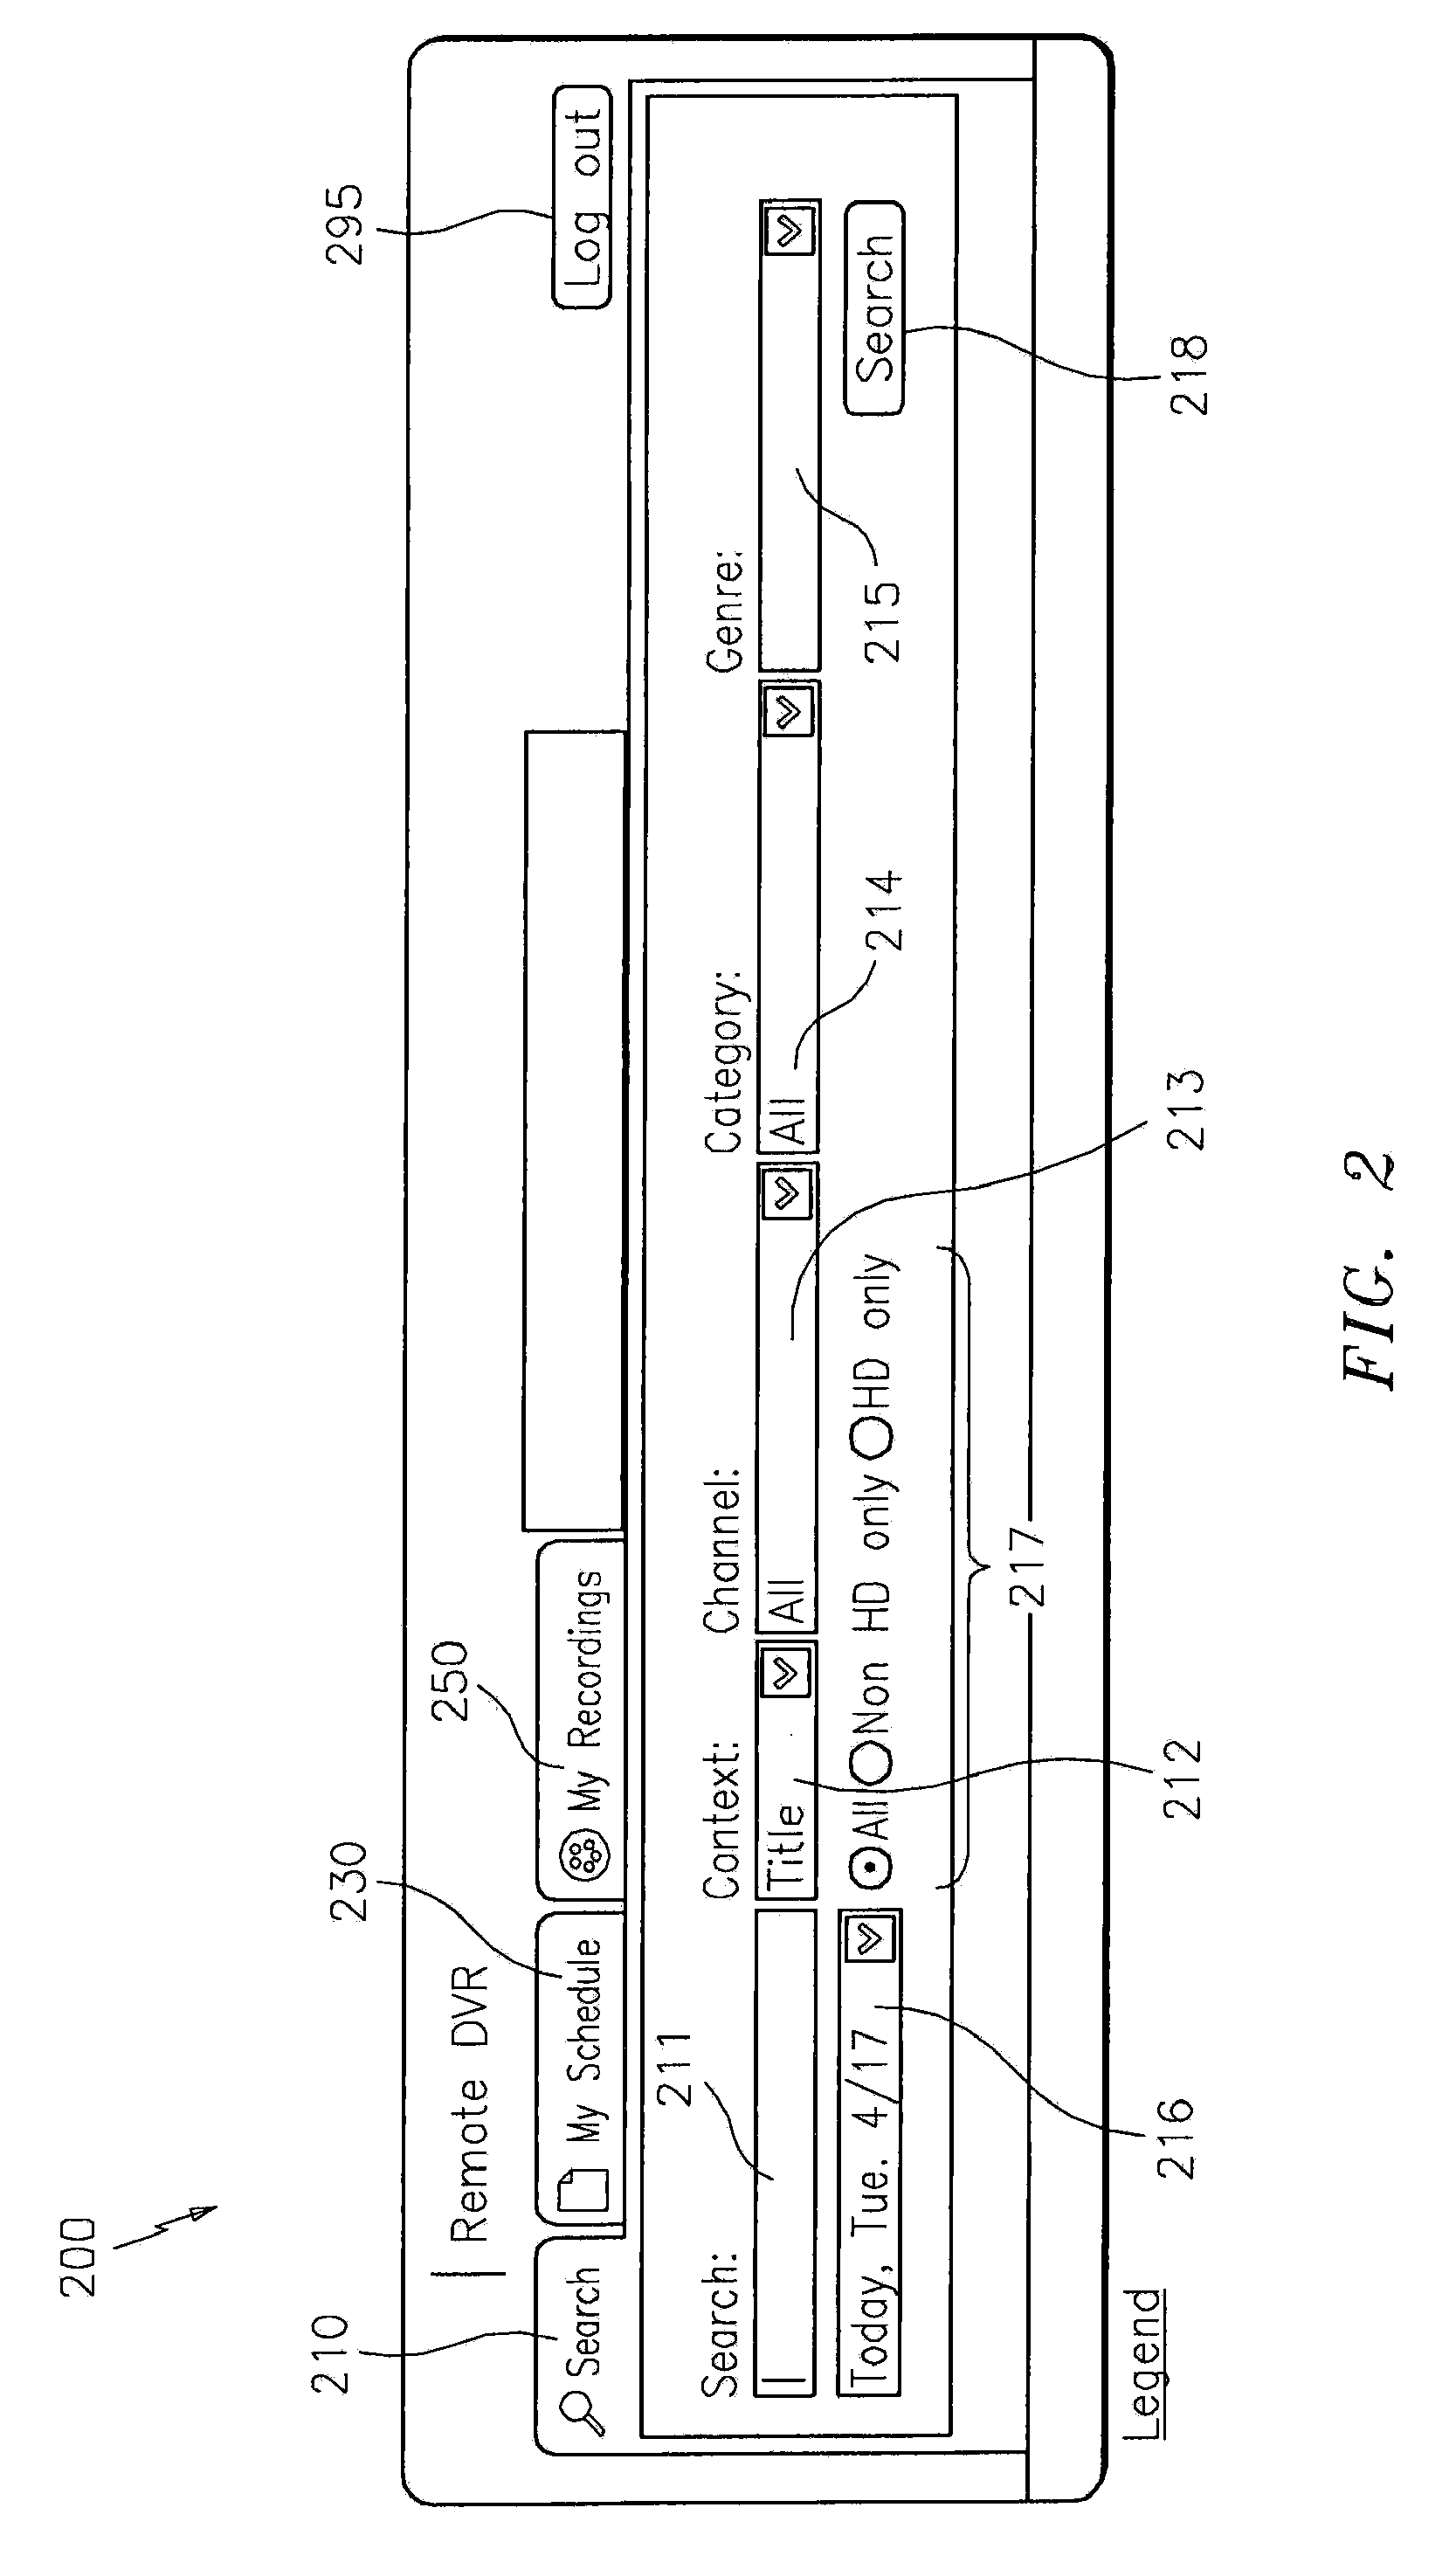 Systems, methods, and computer products for a customized remote recording interface